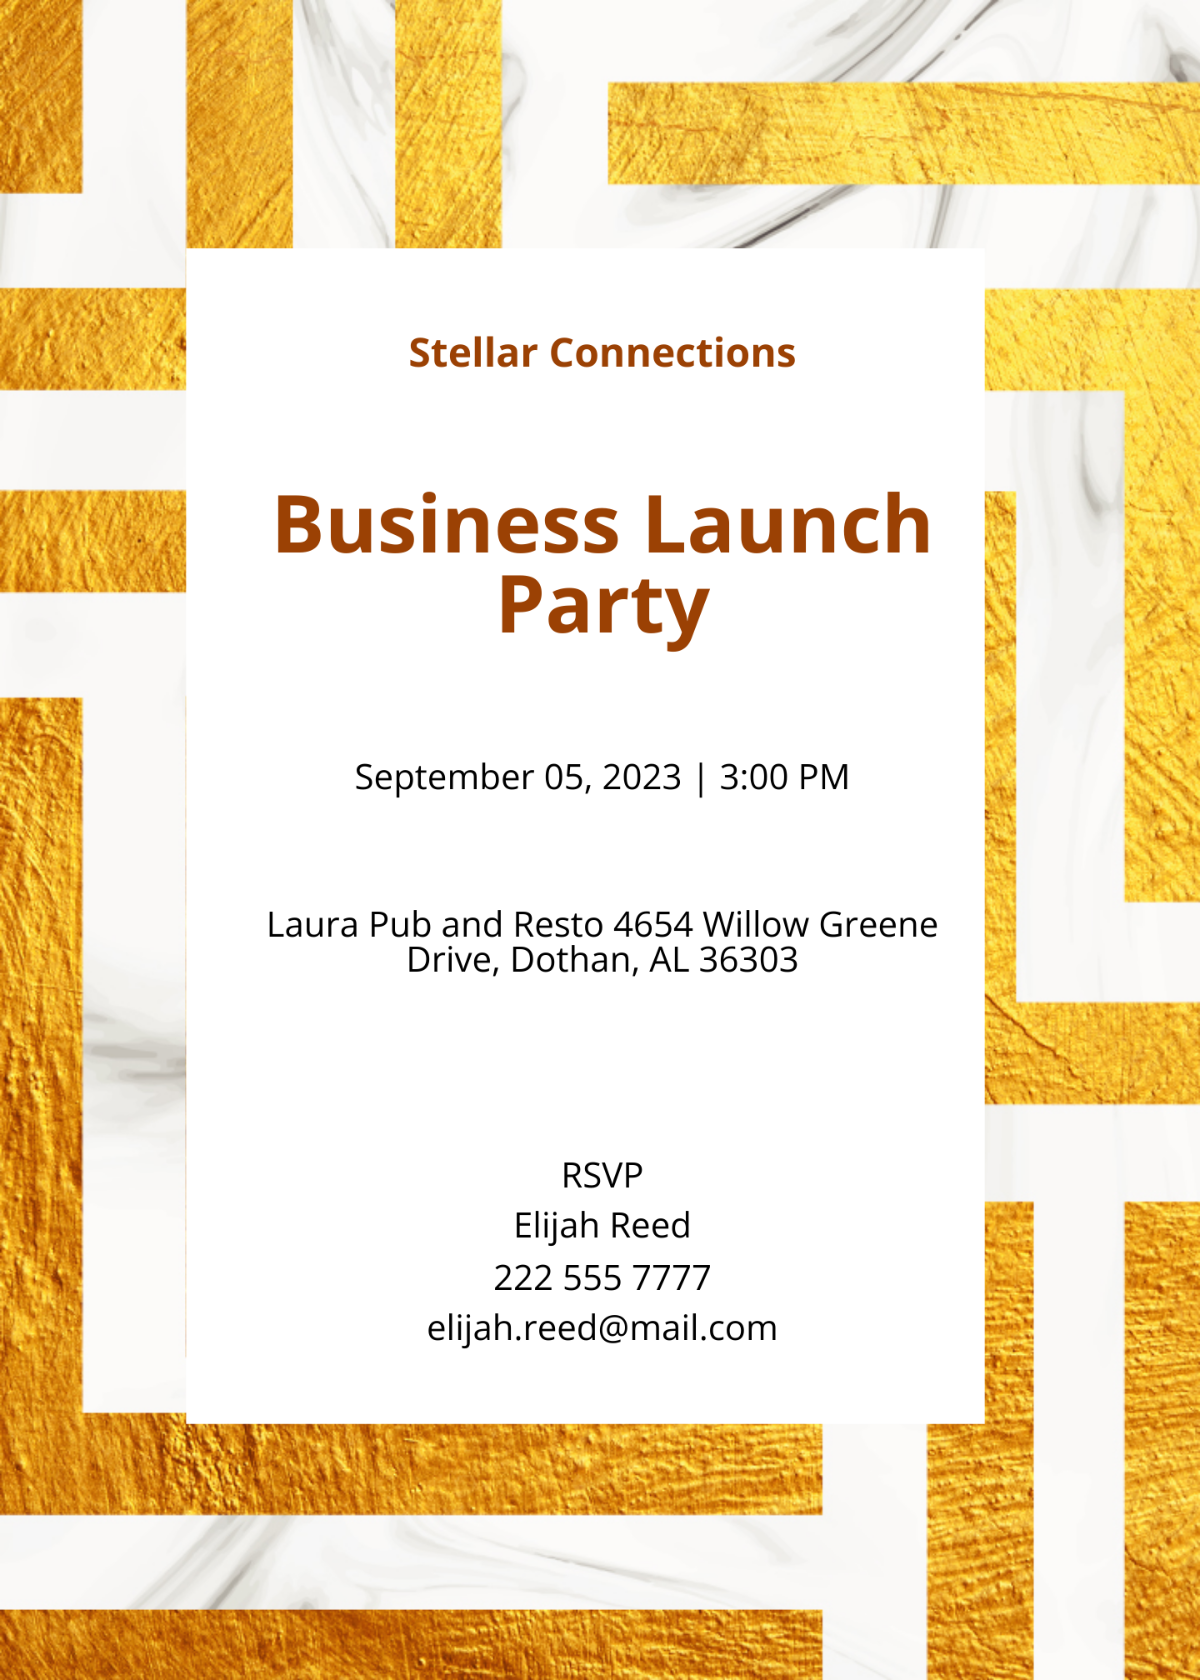 Business Launch Party Invitation